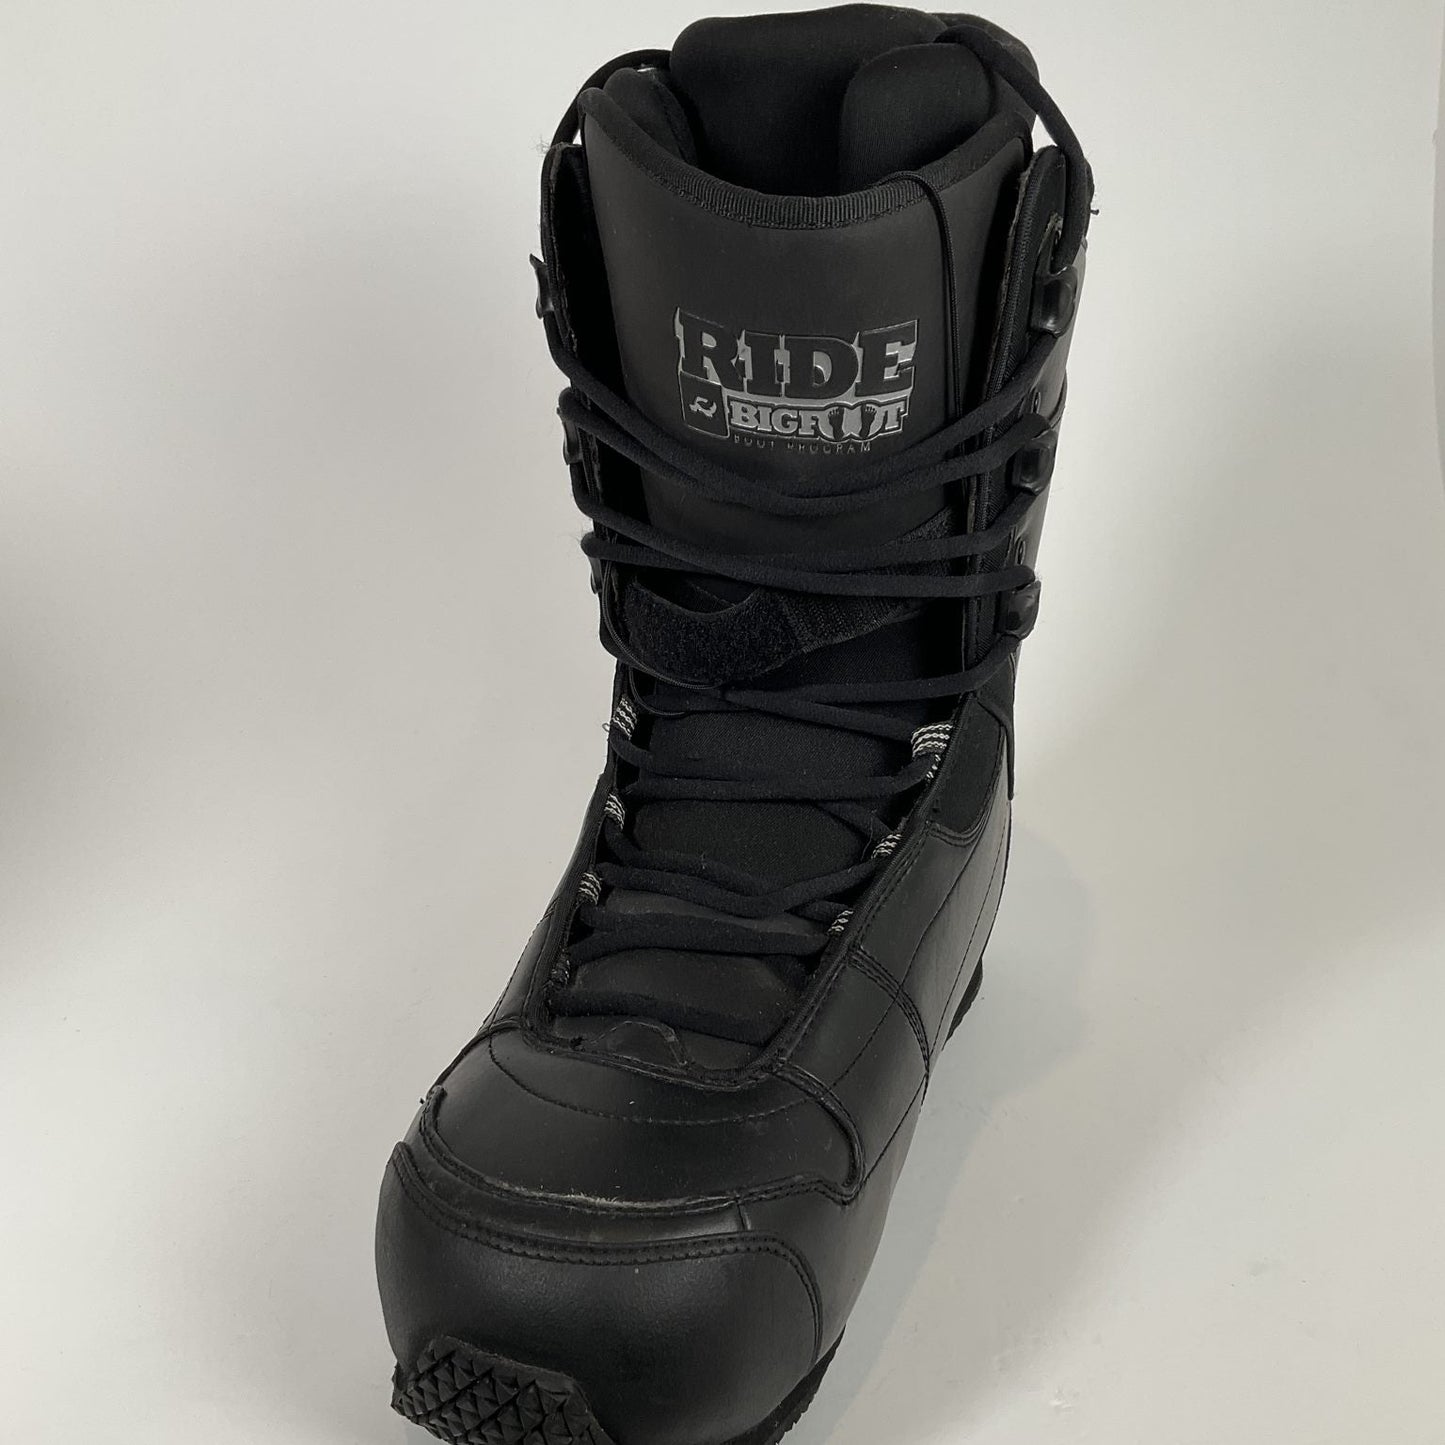 Ride Bigfoot - Snowboarding Boots Size 16 Shoes